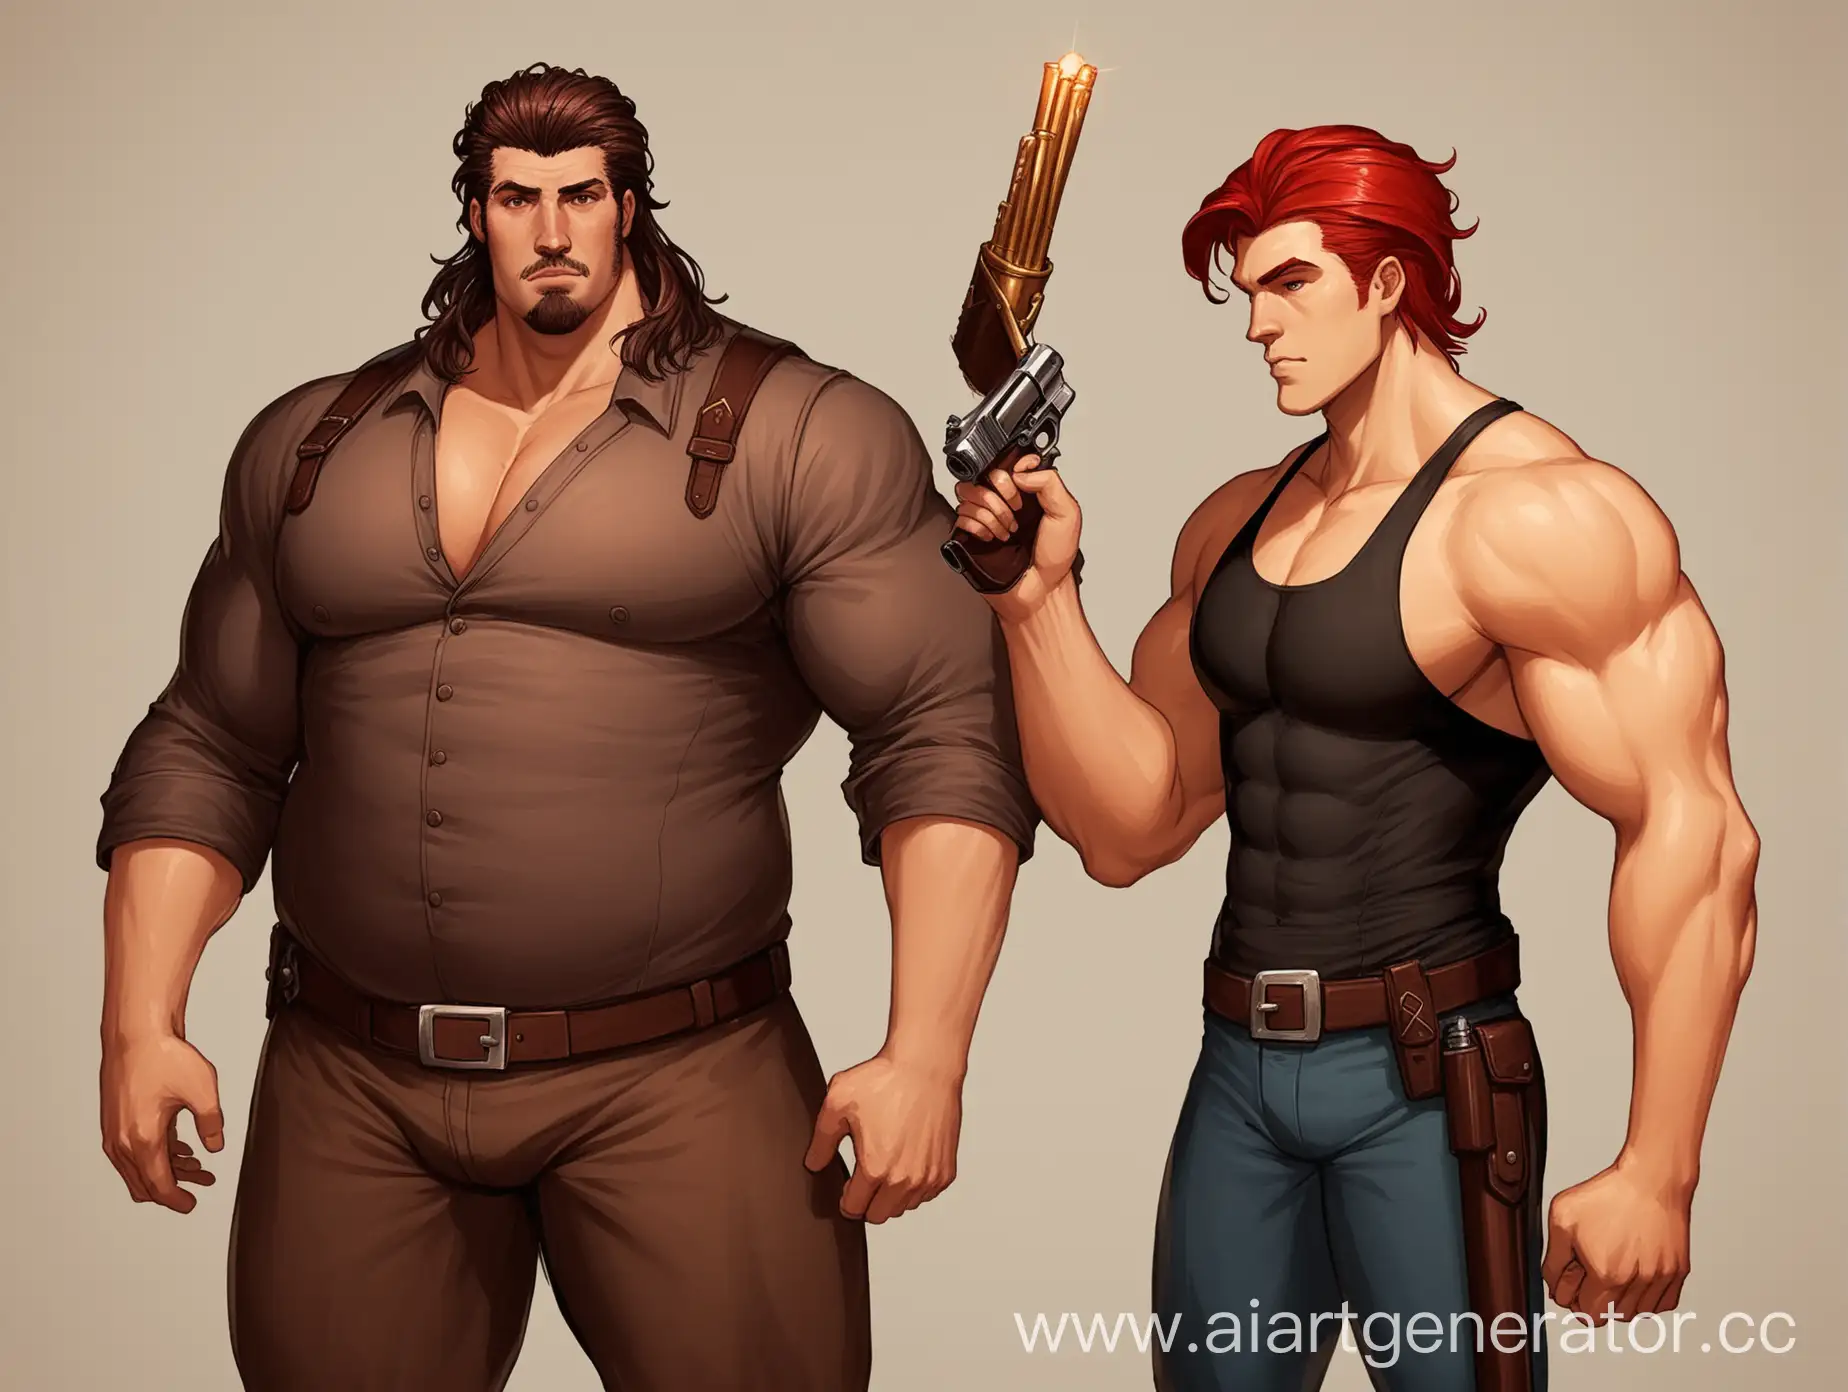 a tall, thin guy with dark brown hair (Anderka hairstyle) - he has a baton in one hand and a pistol in the other.
next to him is a beefy guy of medium height with red hair (half-box)